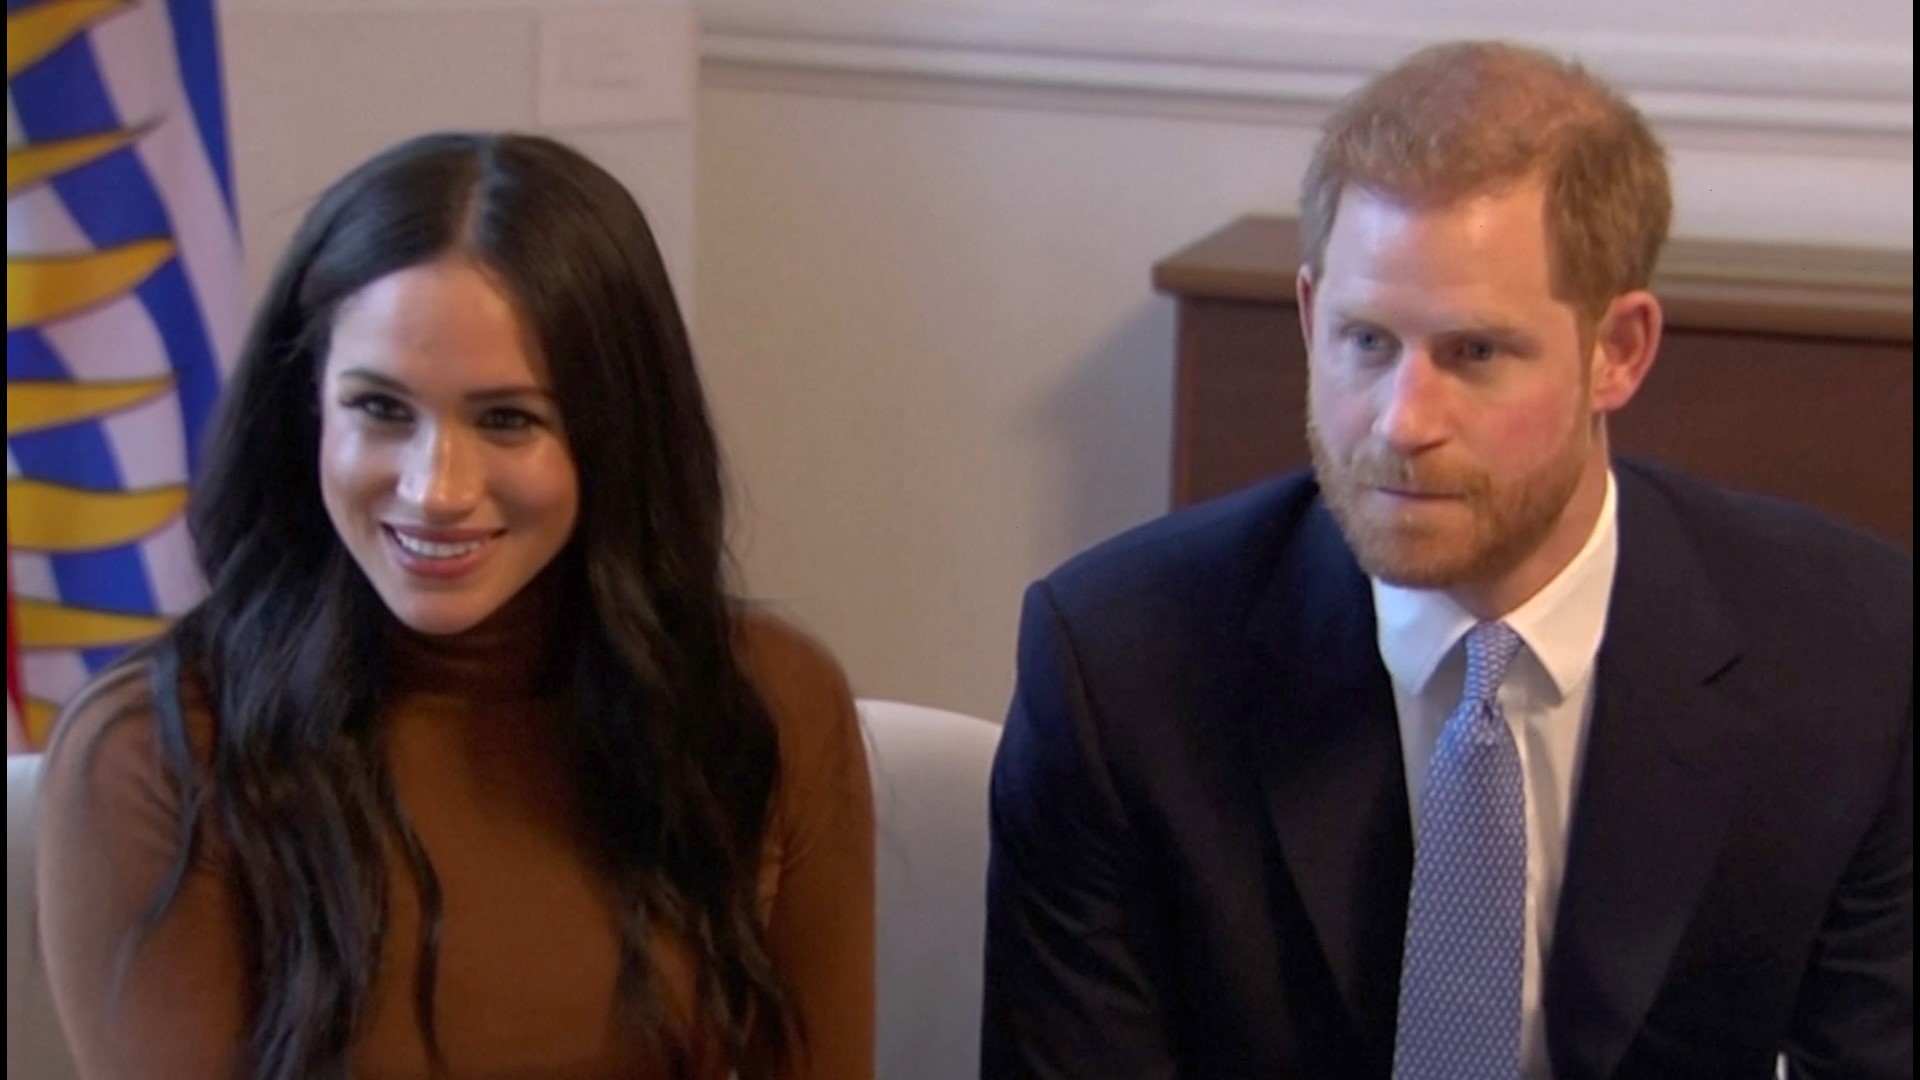 Prince Harry and Meghan Markle;s financial independence means they could easily become the world's highest-earning celebrity couple. Buzz60's Maria Mercedes Galuppo has more.